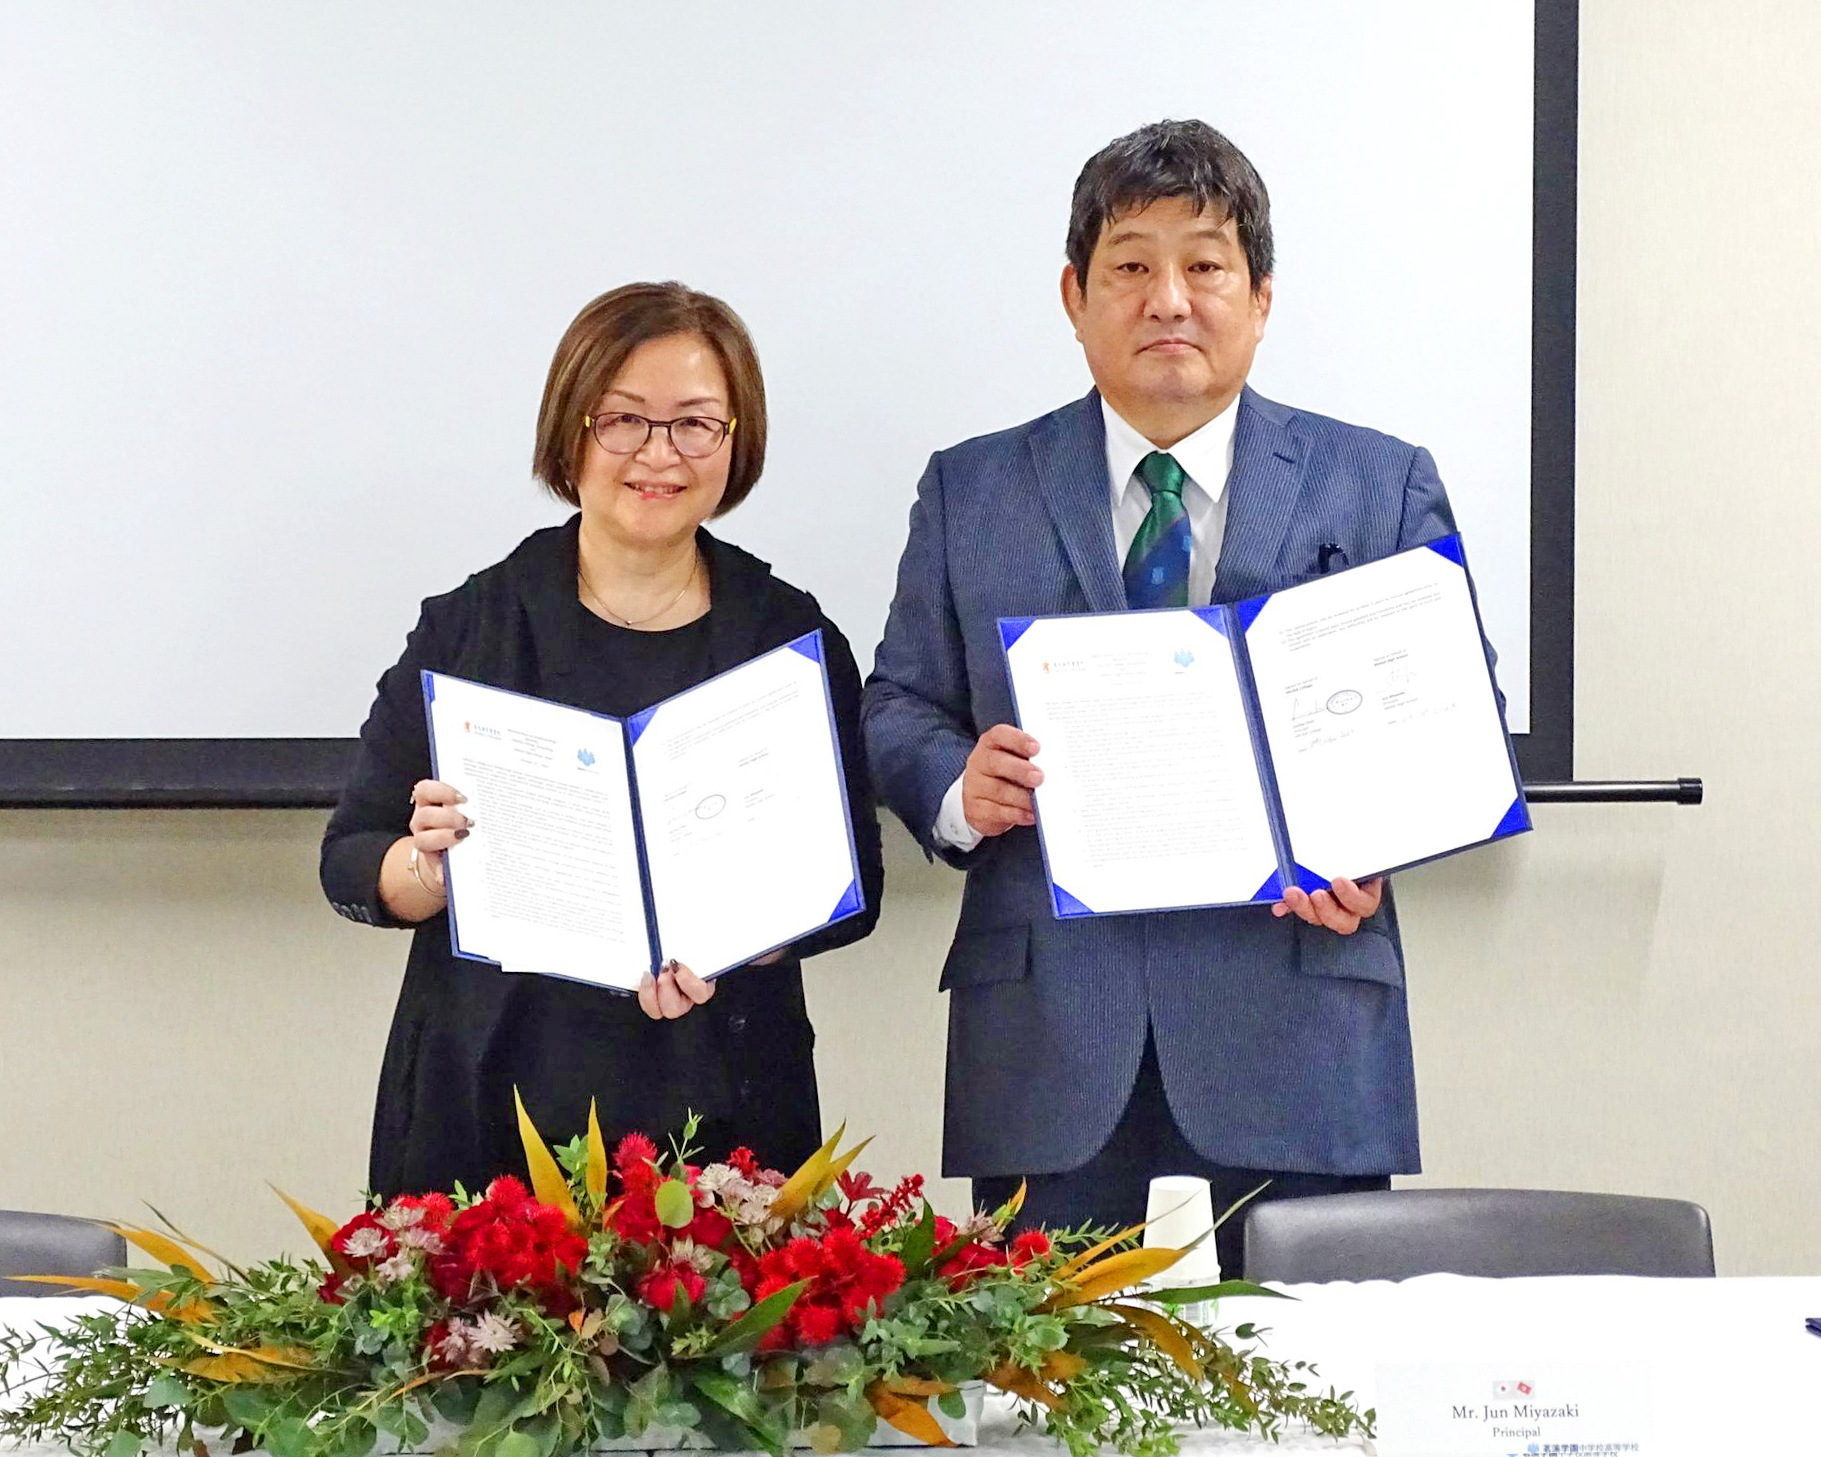 HKUGA College forms a partnership with Meikei High School